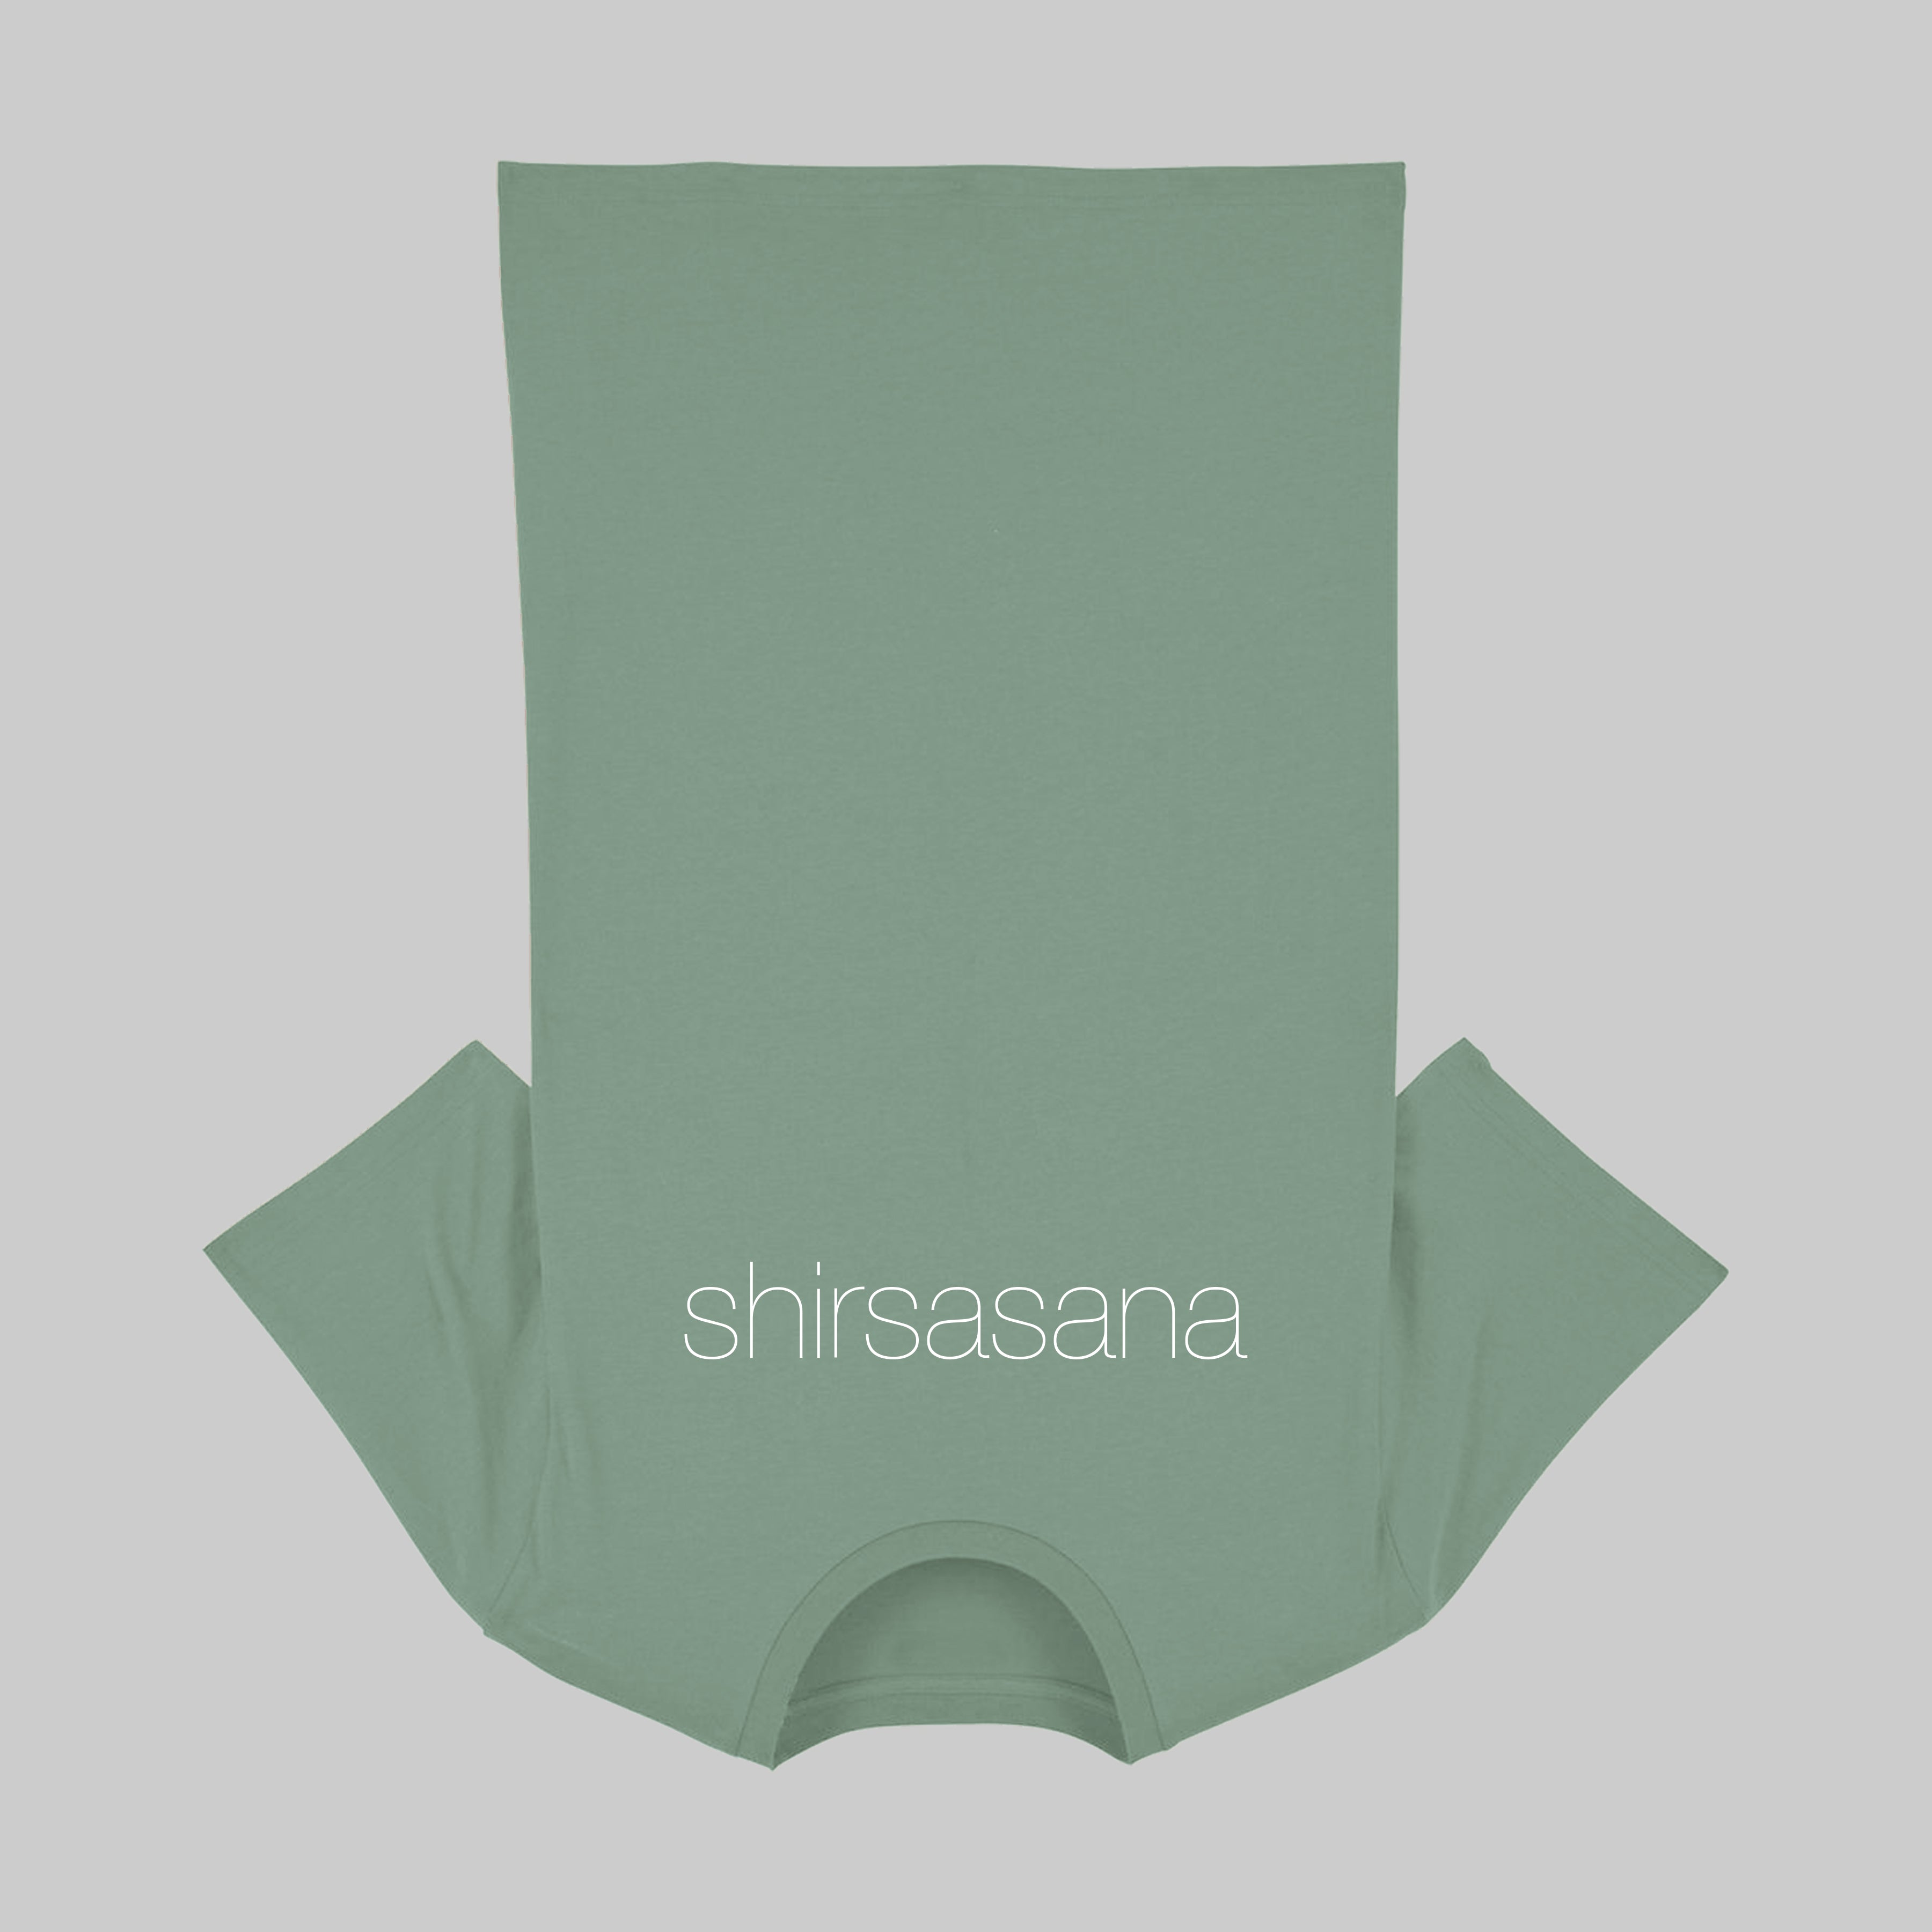 Yos - The Indian Yoga Shop I Buy Best Yoga Props & Accessories Online